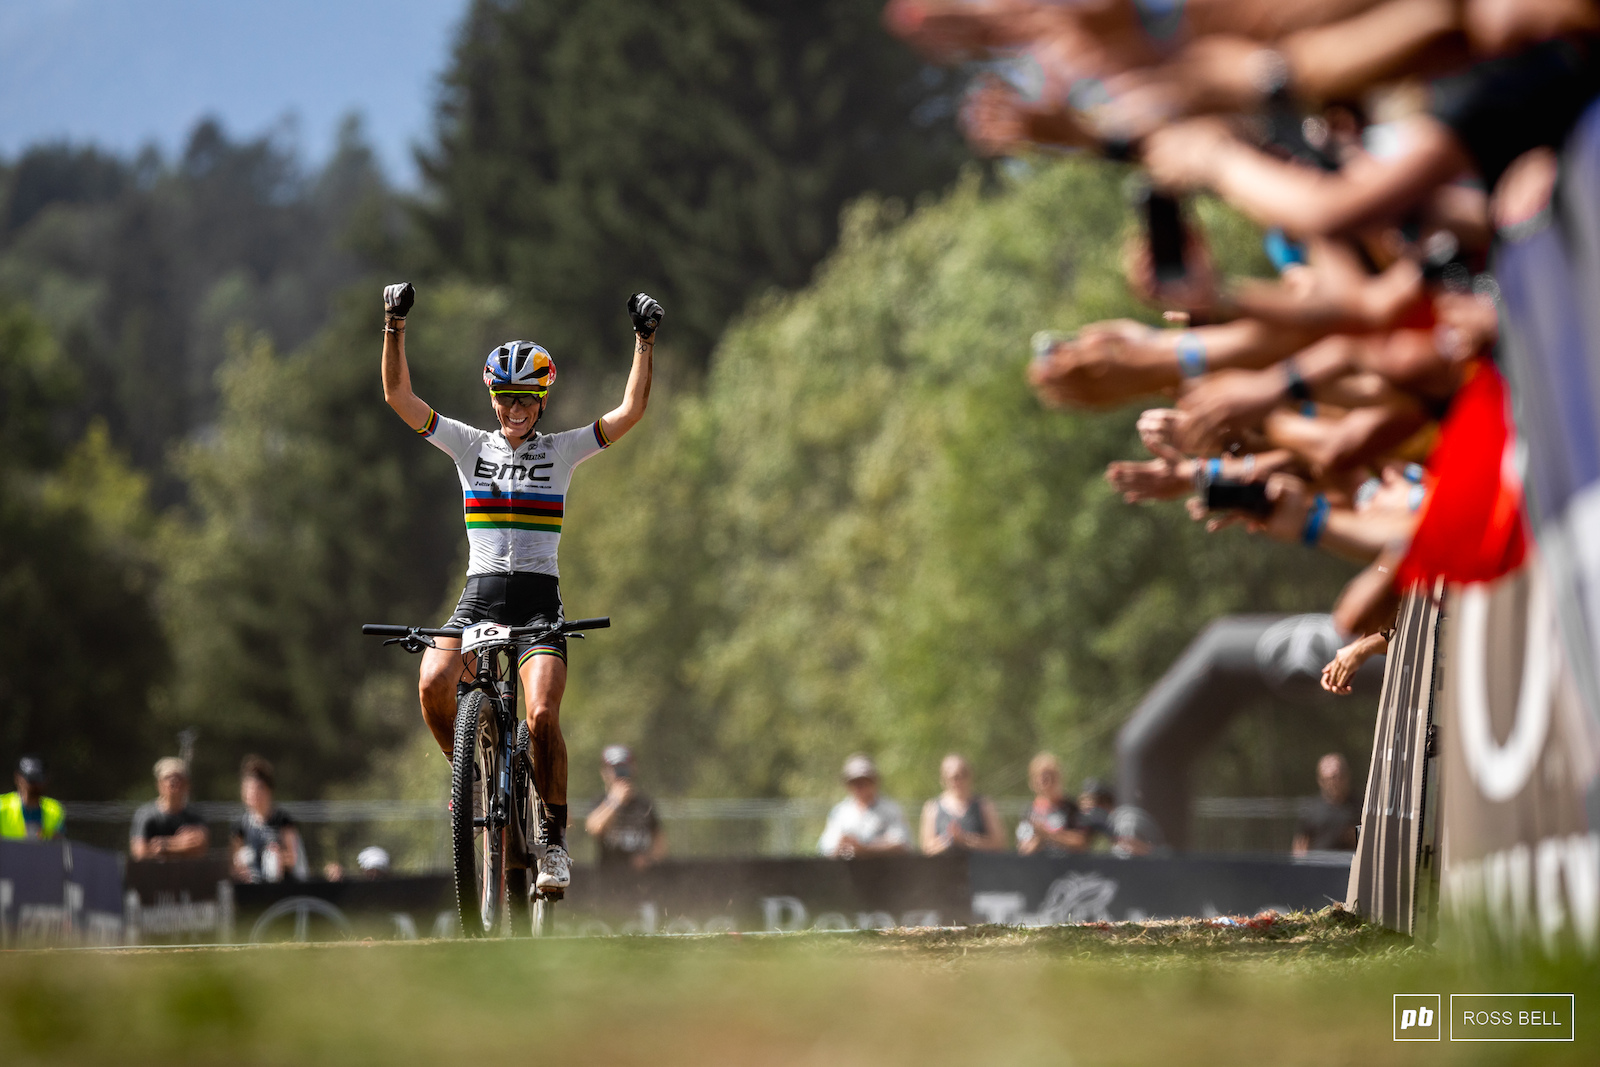 Pauline Ferrand Prevot was simply unbeatable at the end of this 2022 season.